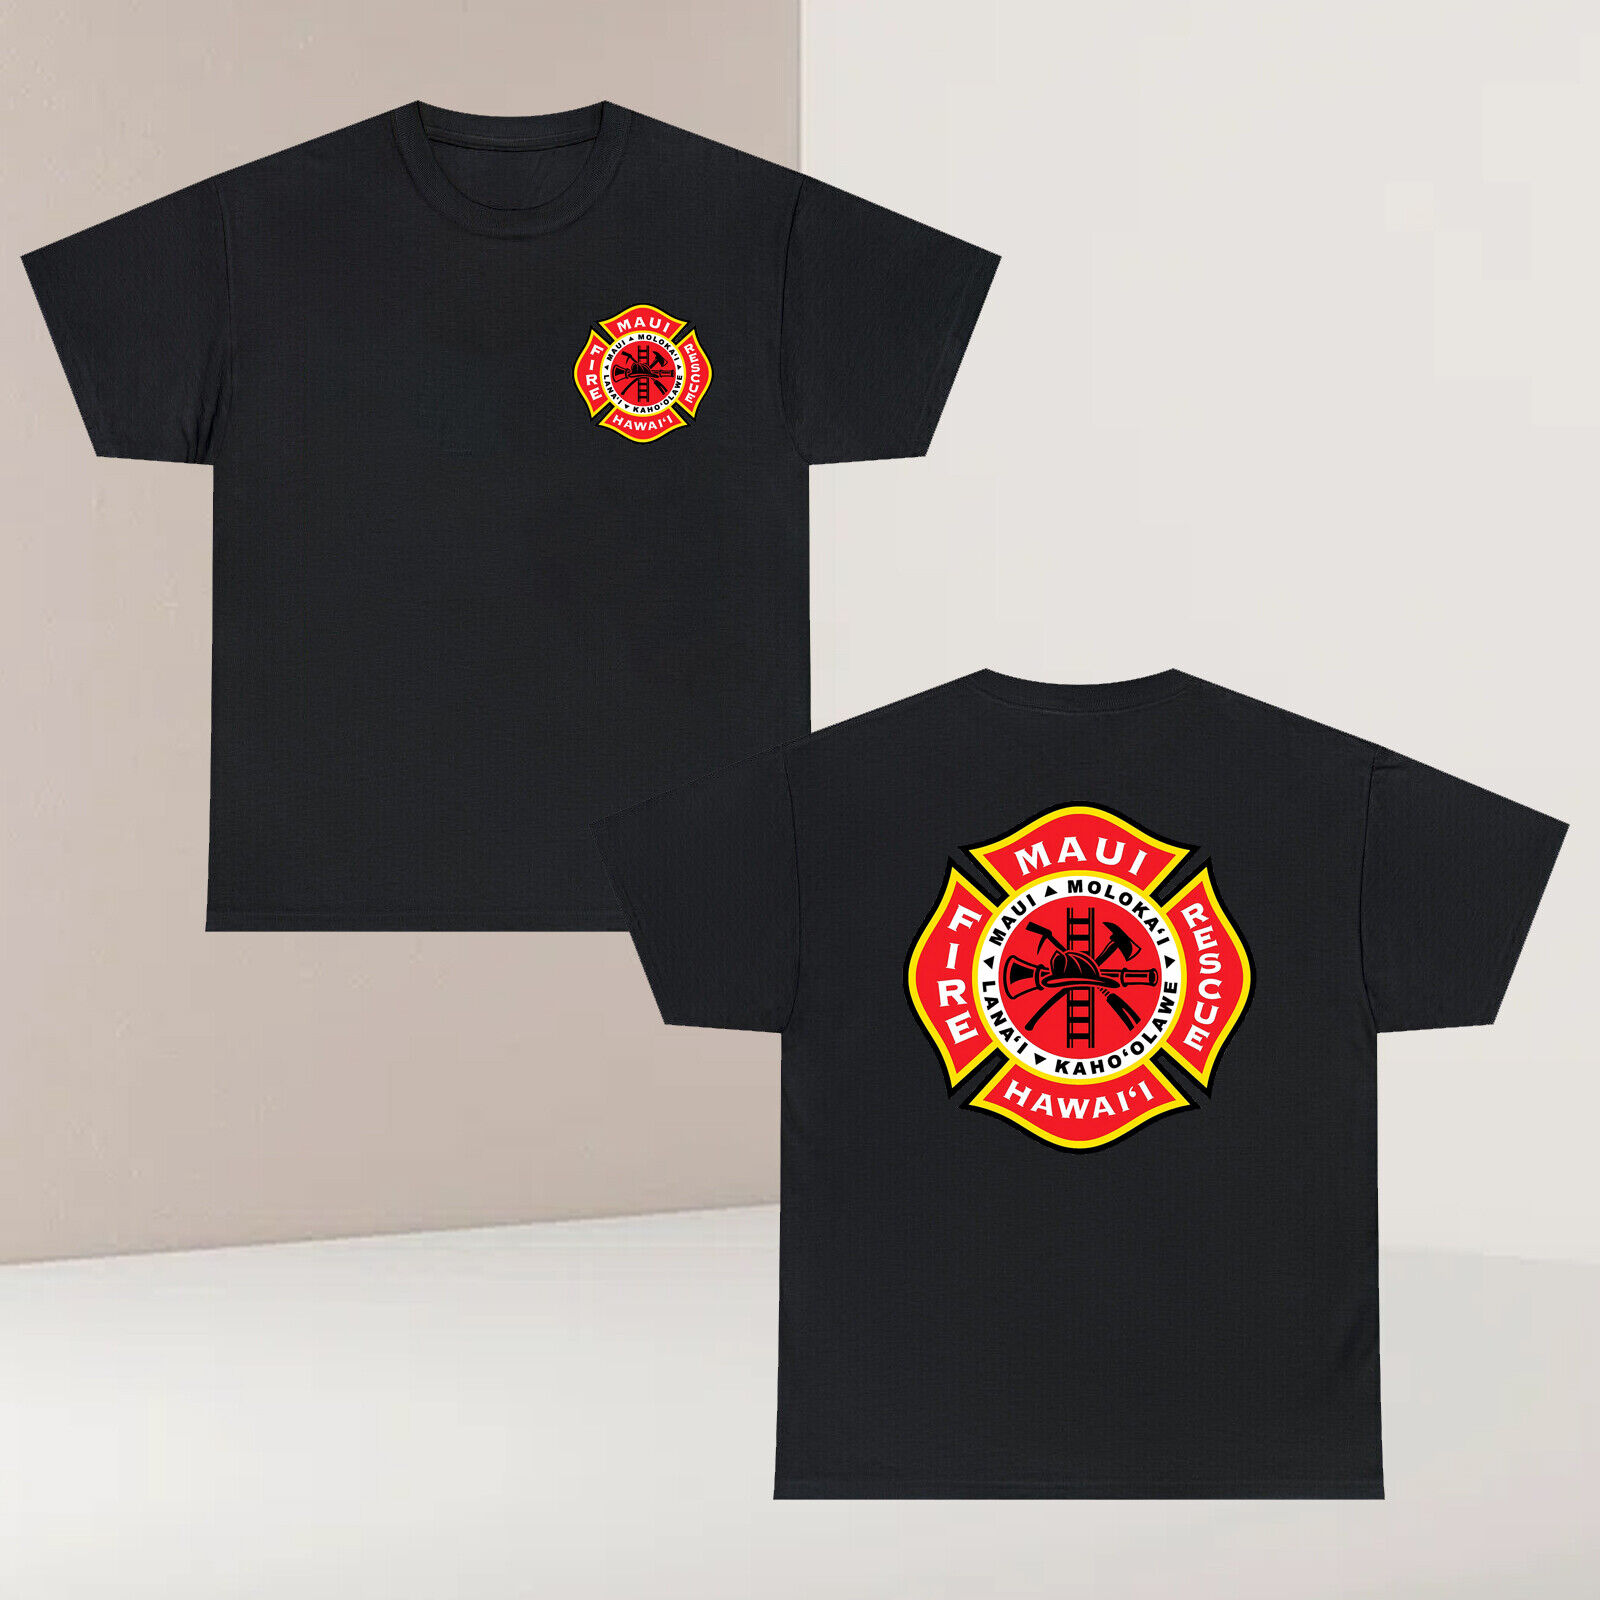 Maui County Fire Department Logo Men's 2 Sided T-Shirt Size S to 5XL